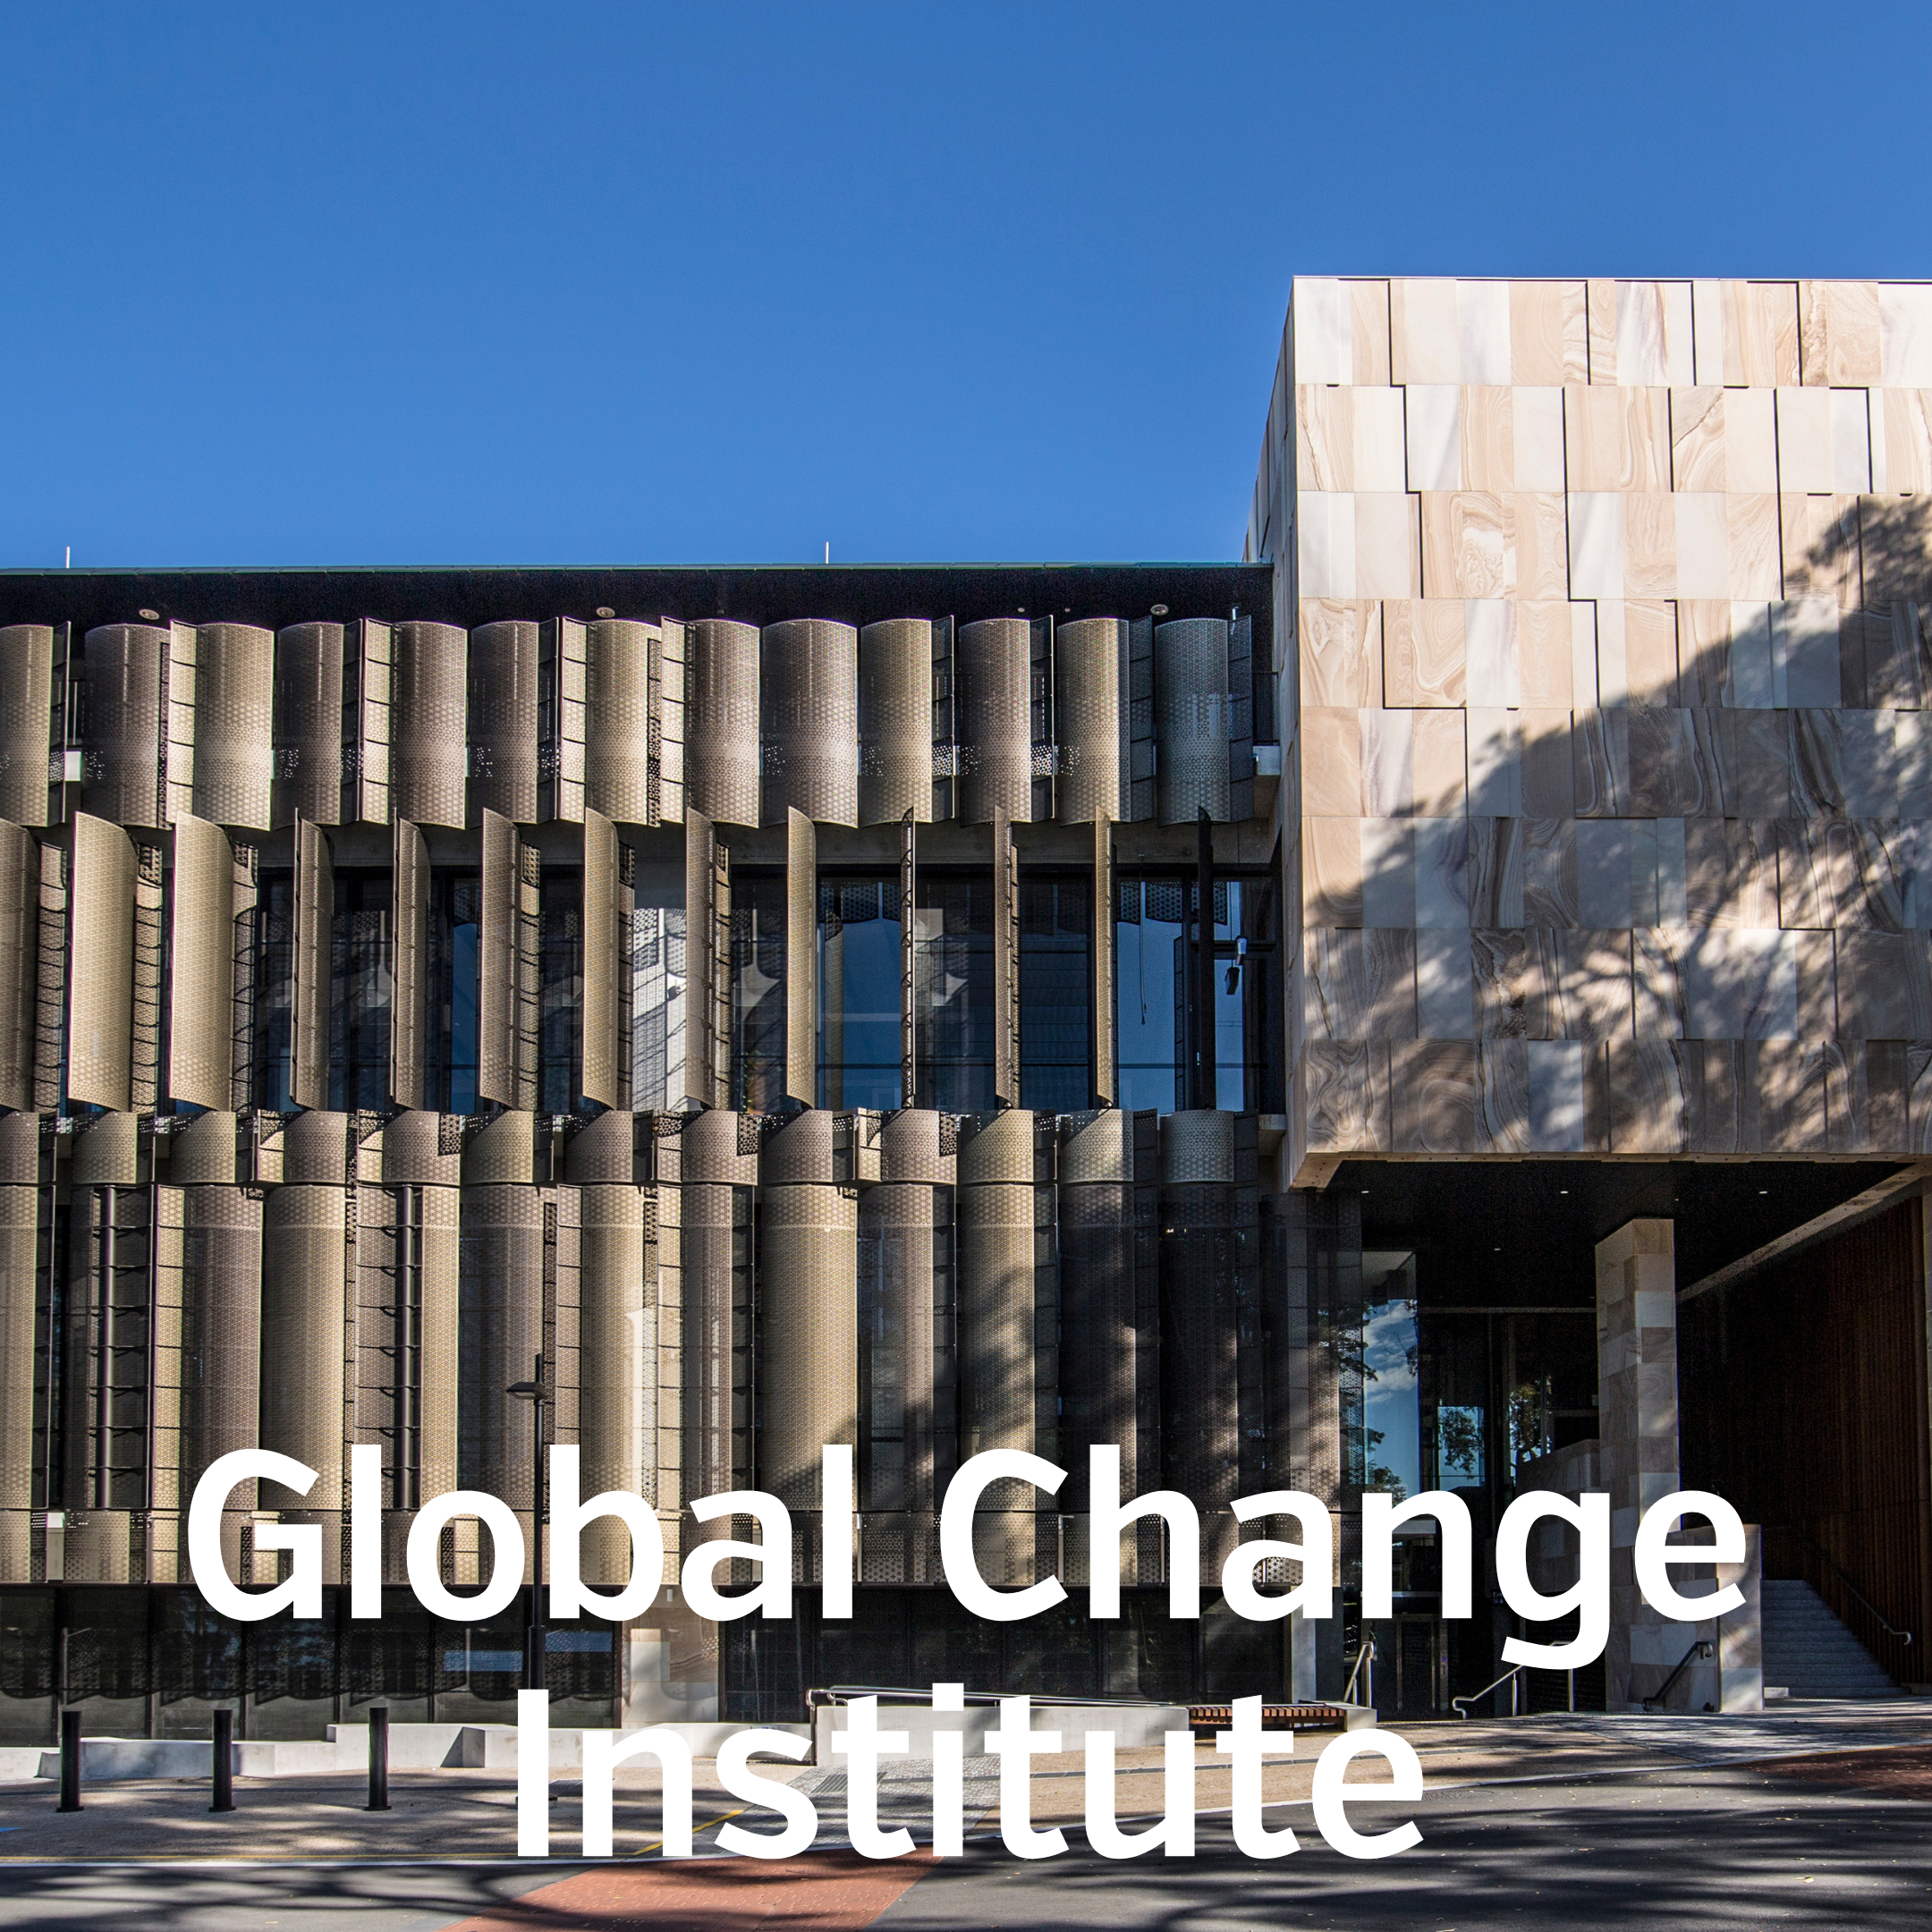 Global Change Institute Operable Louvres